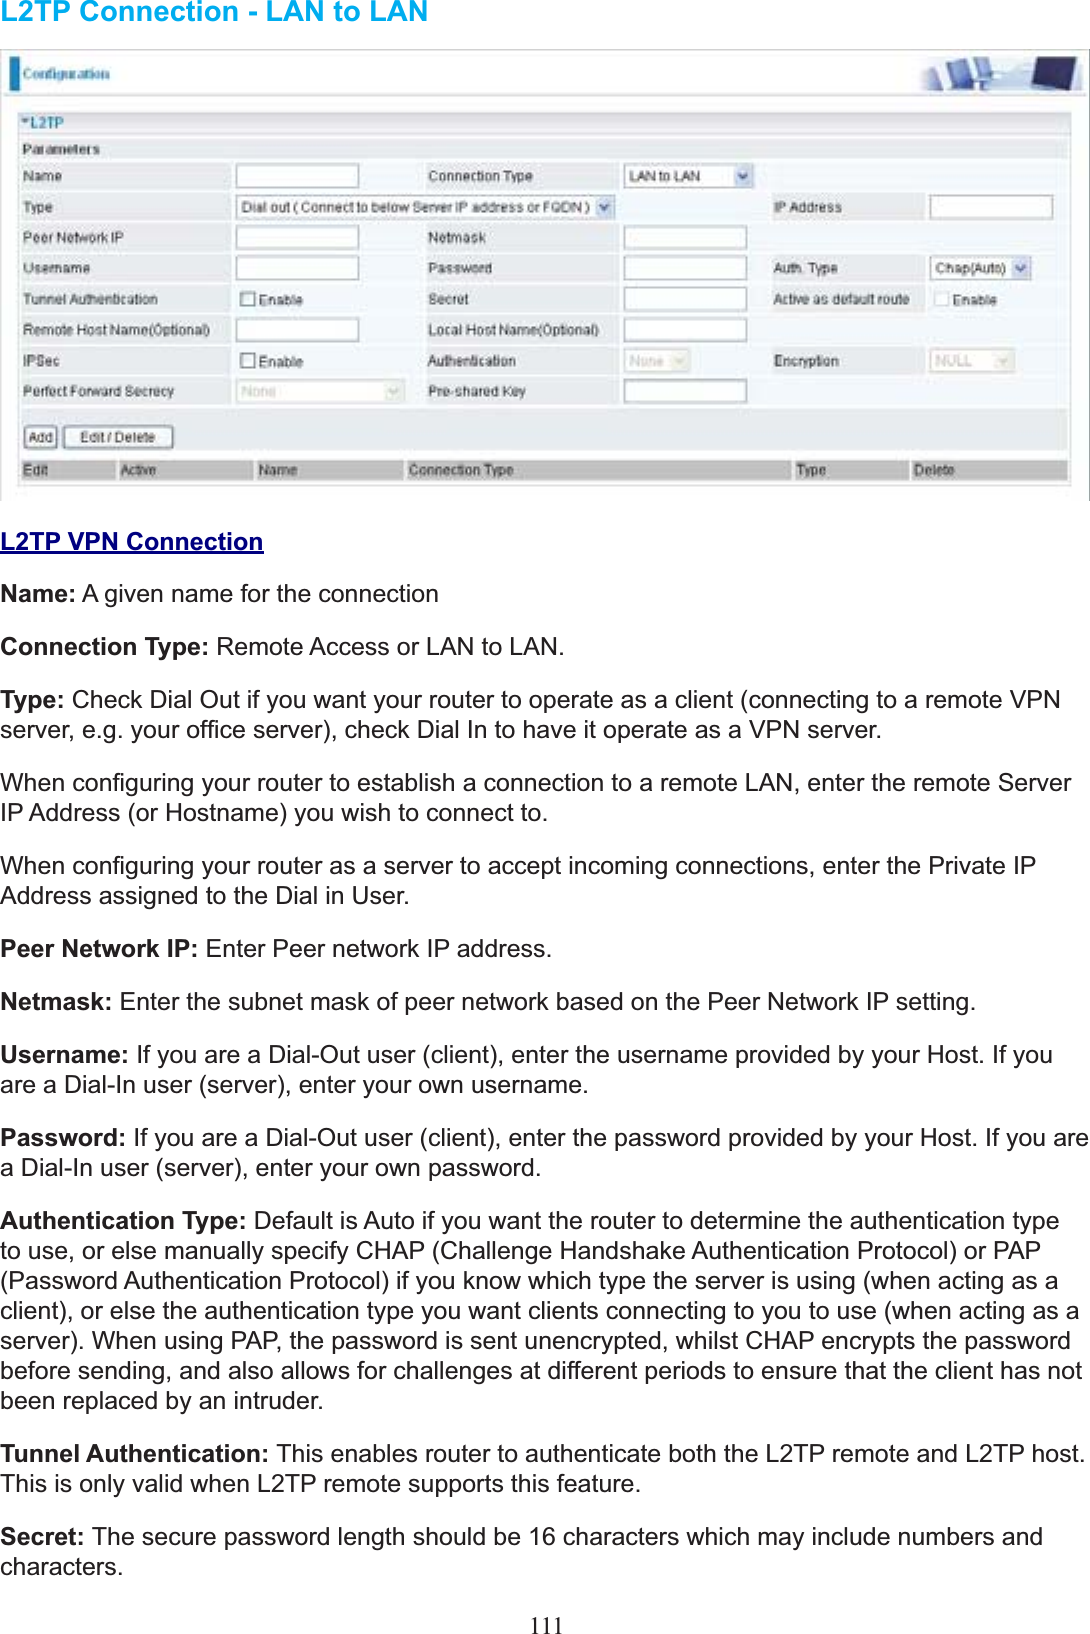 L2TP Connection - LAN to LANL2TP VPN ConnectionName: A given name for the connection Connection Type: Remote Access or LAN to LAN.Type: Check Dial Out if you want your router to operate as a client (connecting to a remote VPN VHUYHUHJ\RXURI¿FHVHUYHUFKHFN&apos;LDO,QWRKDYHLWRSHUDWHDVD931VHUYHU:KHQFRQ¿JXULQJ\RXUURXWHUWRHVWDEOLVKDFRQQHFWLRQWRDUHPRWH/$1HQWHUWKHUHPRWH6HUYHUIP Address (or Hostname) you wish to connect to.:KHQFRQ¿JXULQJ\RXUURXWHUDVDVHUYHUWRDFFHSWLQFRPLQJFRQQHFWLRQVHQWHUWKH3ULYDWH,3Address assigned to the Dial in User.Peer Network IP: Enter Peer network IP address.Netmask: Enter the subnet mask of peer network based on the Peer Network IP setting.Username: If you are a Dial-Out user (client), enter the username provided by your Host. If you are a Dial-In user (server), enter your own username.Password: If you are a Dial-Out user (client), enter the password provided by your Host. If you are a Dial-In user (server), enter your own password.Authentication Type: Default is Auto if you want the router to determine the authentication type to use, or else manually specify CHAP (Challenge Handshake Authentication Protocol) or PAP (Password Authentication Protocol) if you know which type the server is using (when acting as a client), or else the authentication type you want clients connecting to you to use (when acting as a VHUYHU:KHQXVLQJ3$3WKHSDVVZRUGLVVHQWXQHQFU\SWHGZKLOVW&amp;+$3HQFU\SWVWKHSDVVZRUGbefore sending, and also allows for challenges at different periods to ensure that the client has not been replaced by an intruder.Tunnel Authentication: This enables router to authenticate both the L2TP remote and L2TP host. This is only valid when L2TP remote supports this feature.Secret: The secure password length should be 16 characters which may include numbers and characters.111